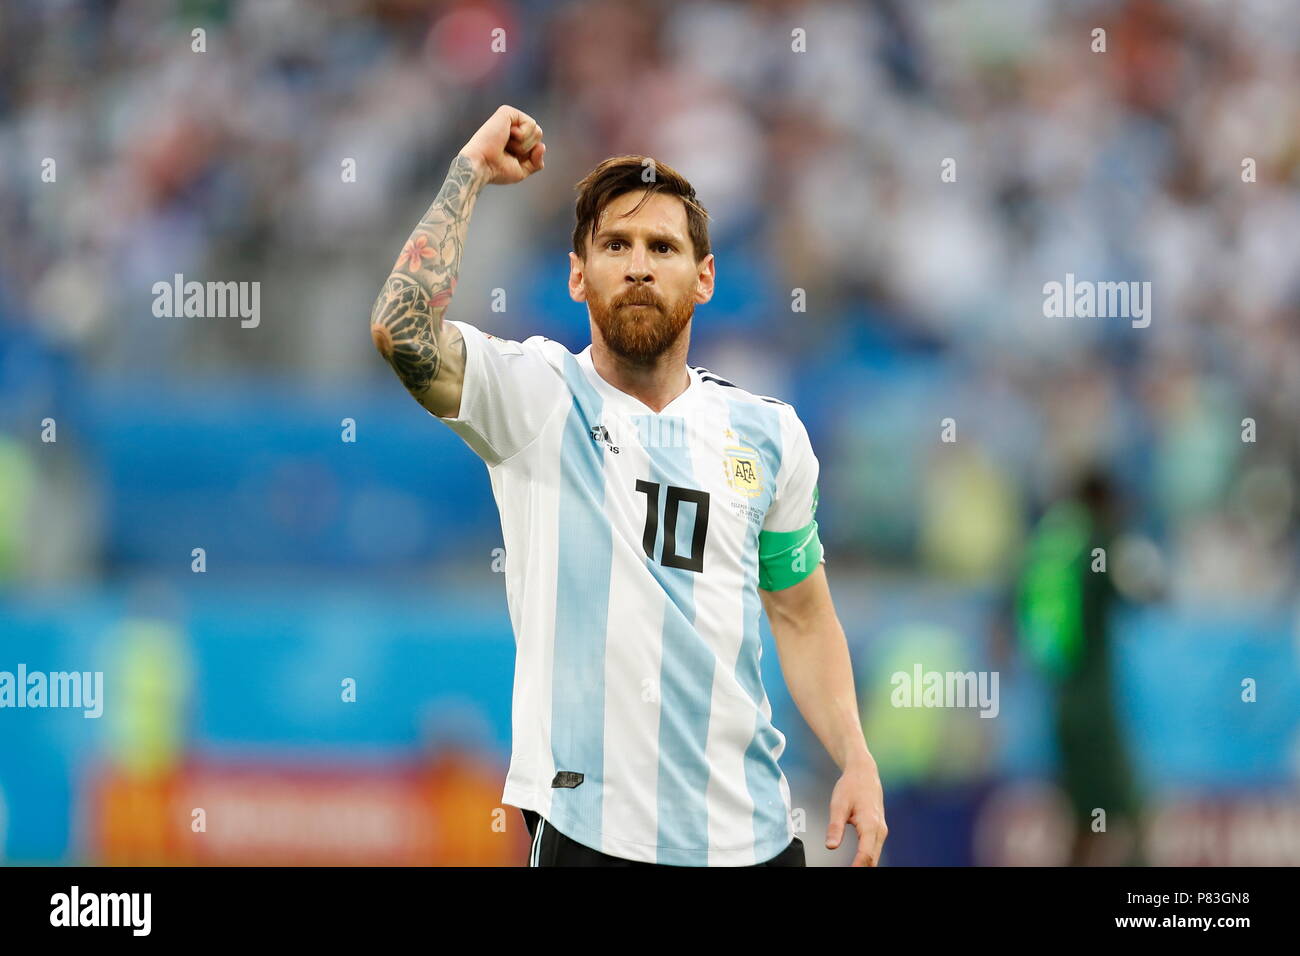 Saint Petersburg, Russia. 26th June, 2018. Lionel Messi (ARG) Football/Soccer : Messi celebrate after his goal on FIFA World Cup Russia 2018 match between Nigeria 1-2 Argentina at the Saint Petersburg Stadium in Saint Petersburg, Russia . Credit: Mutsu KAWAMORI/AFLO/Alamy Live News Stock Photo